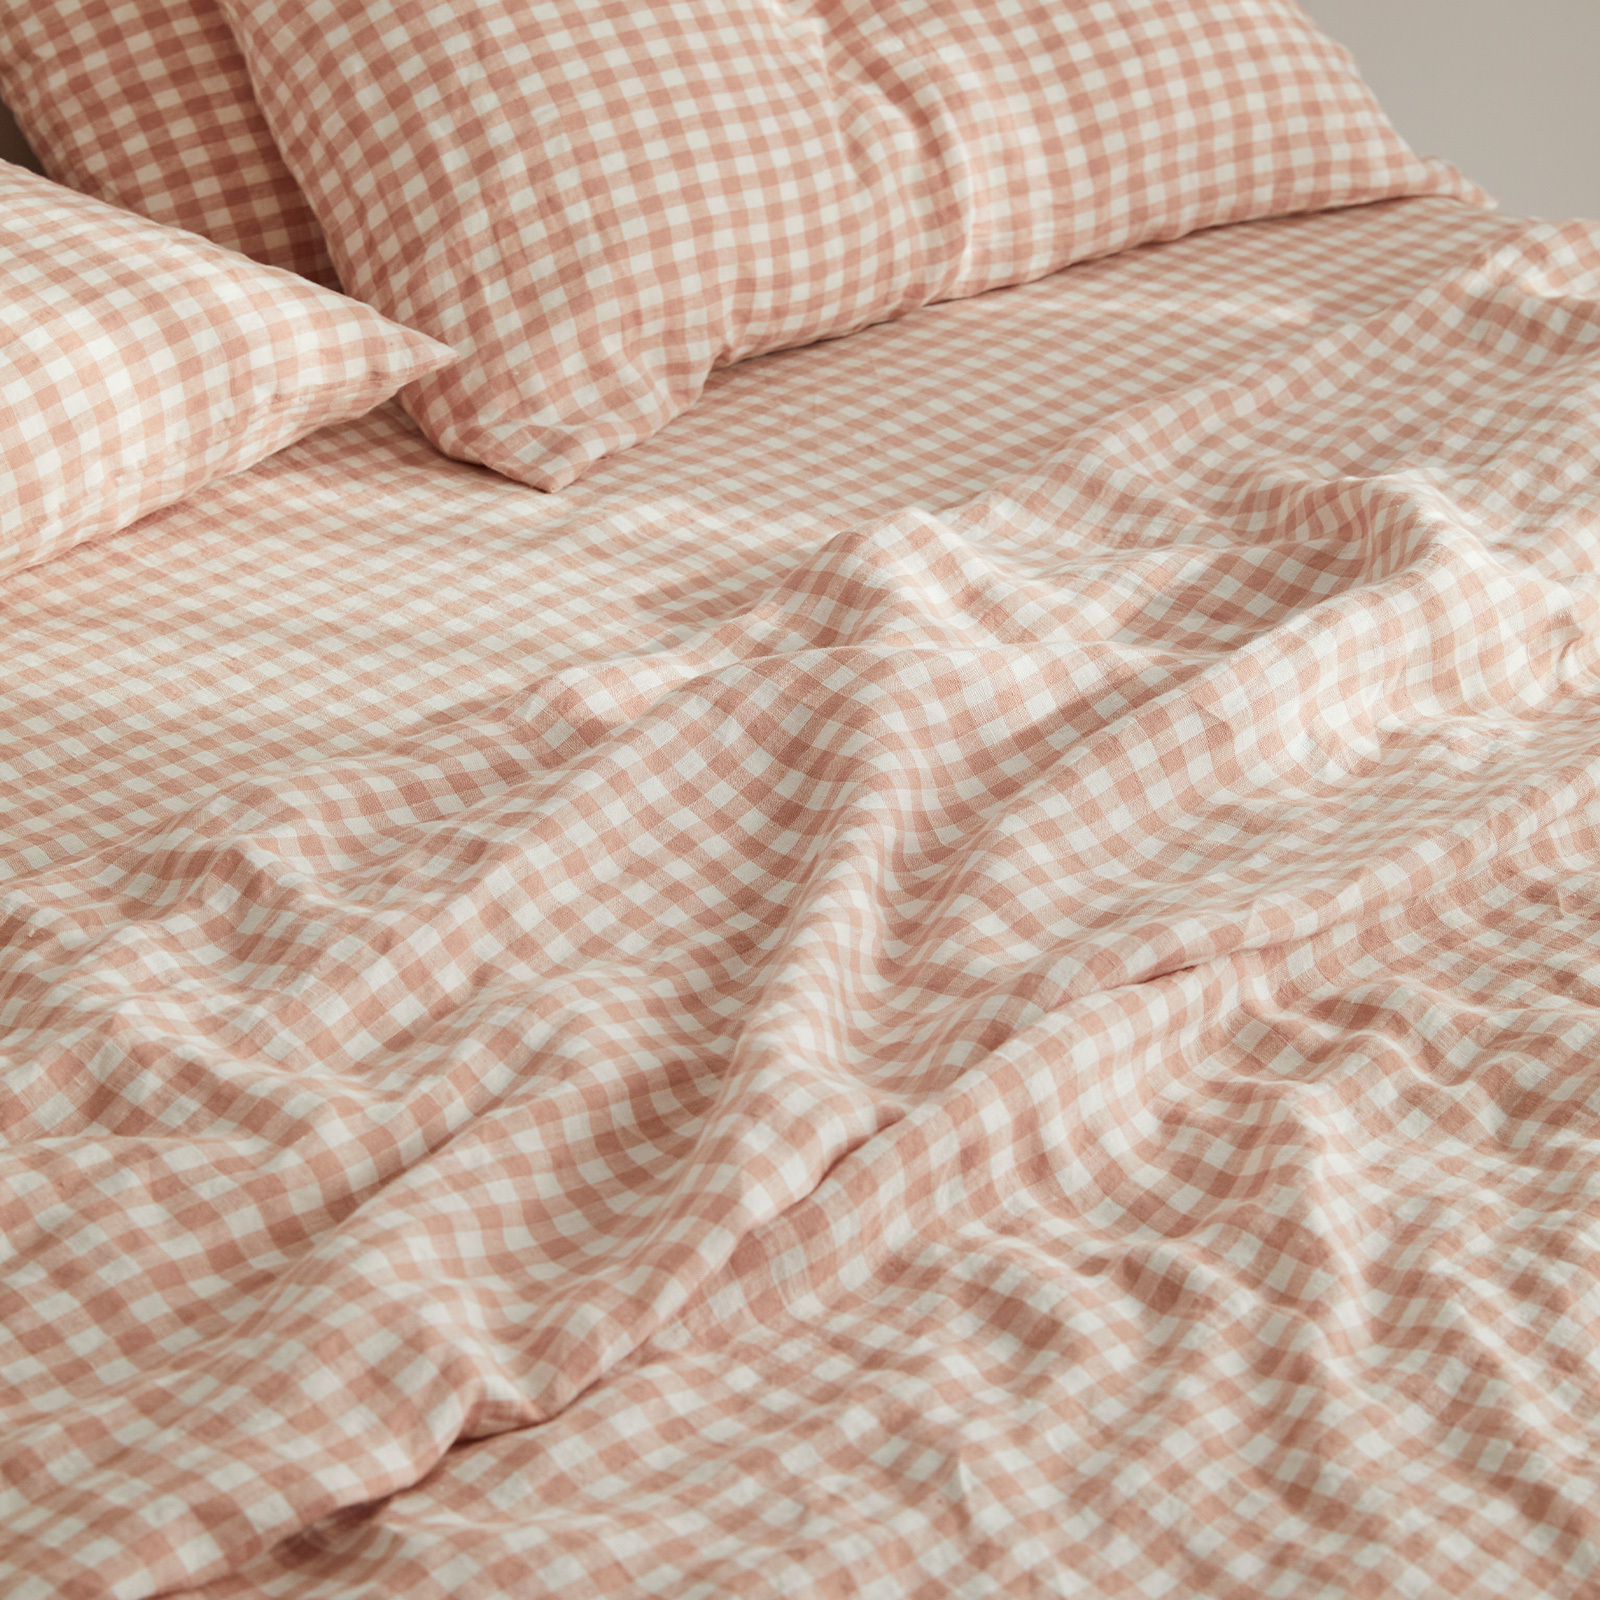 French linen Flat Sheet in CLAY Gingham